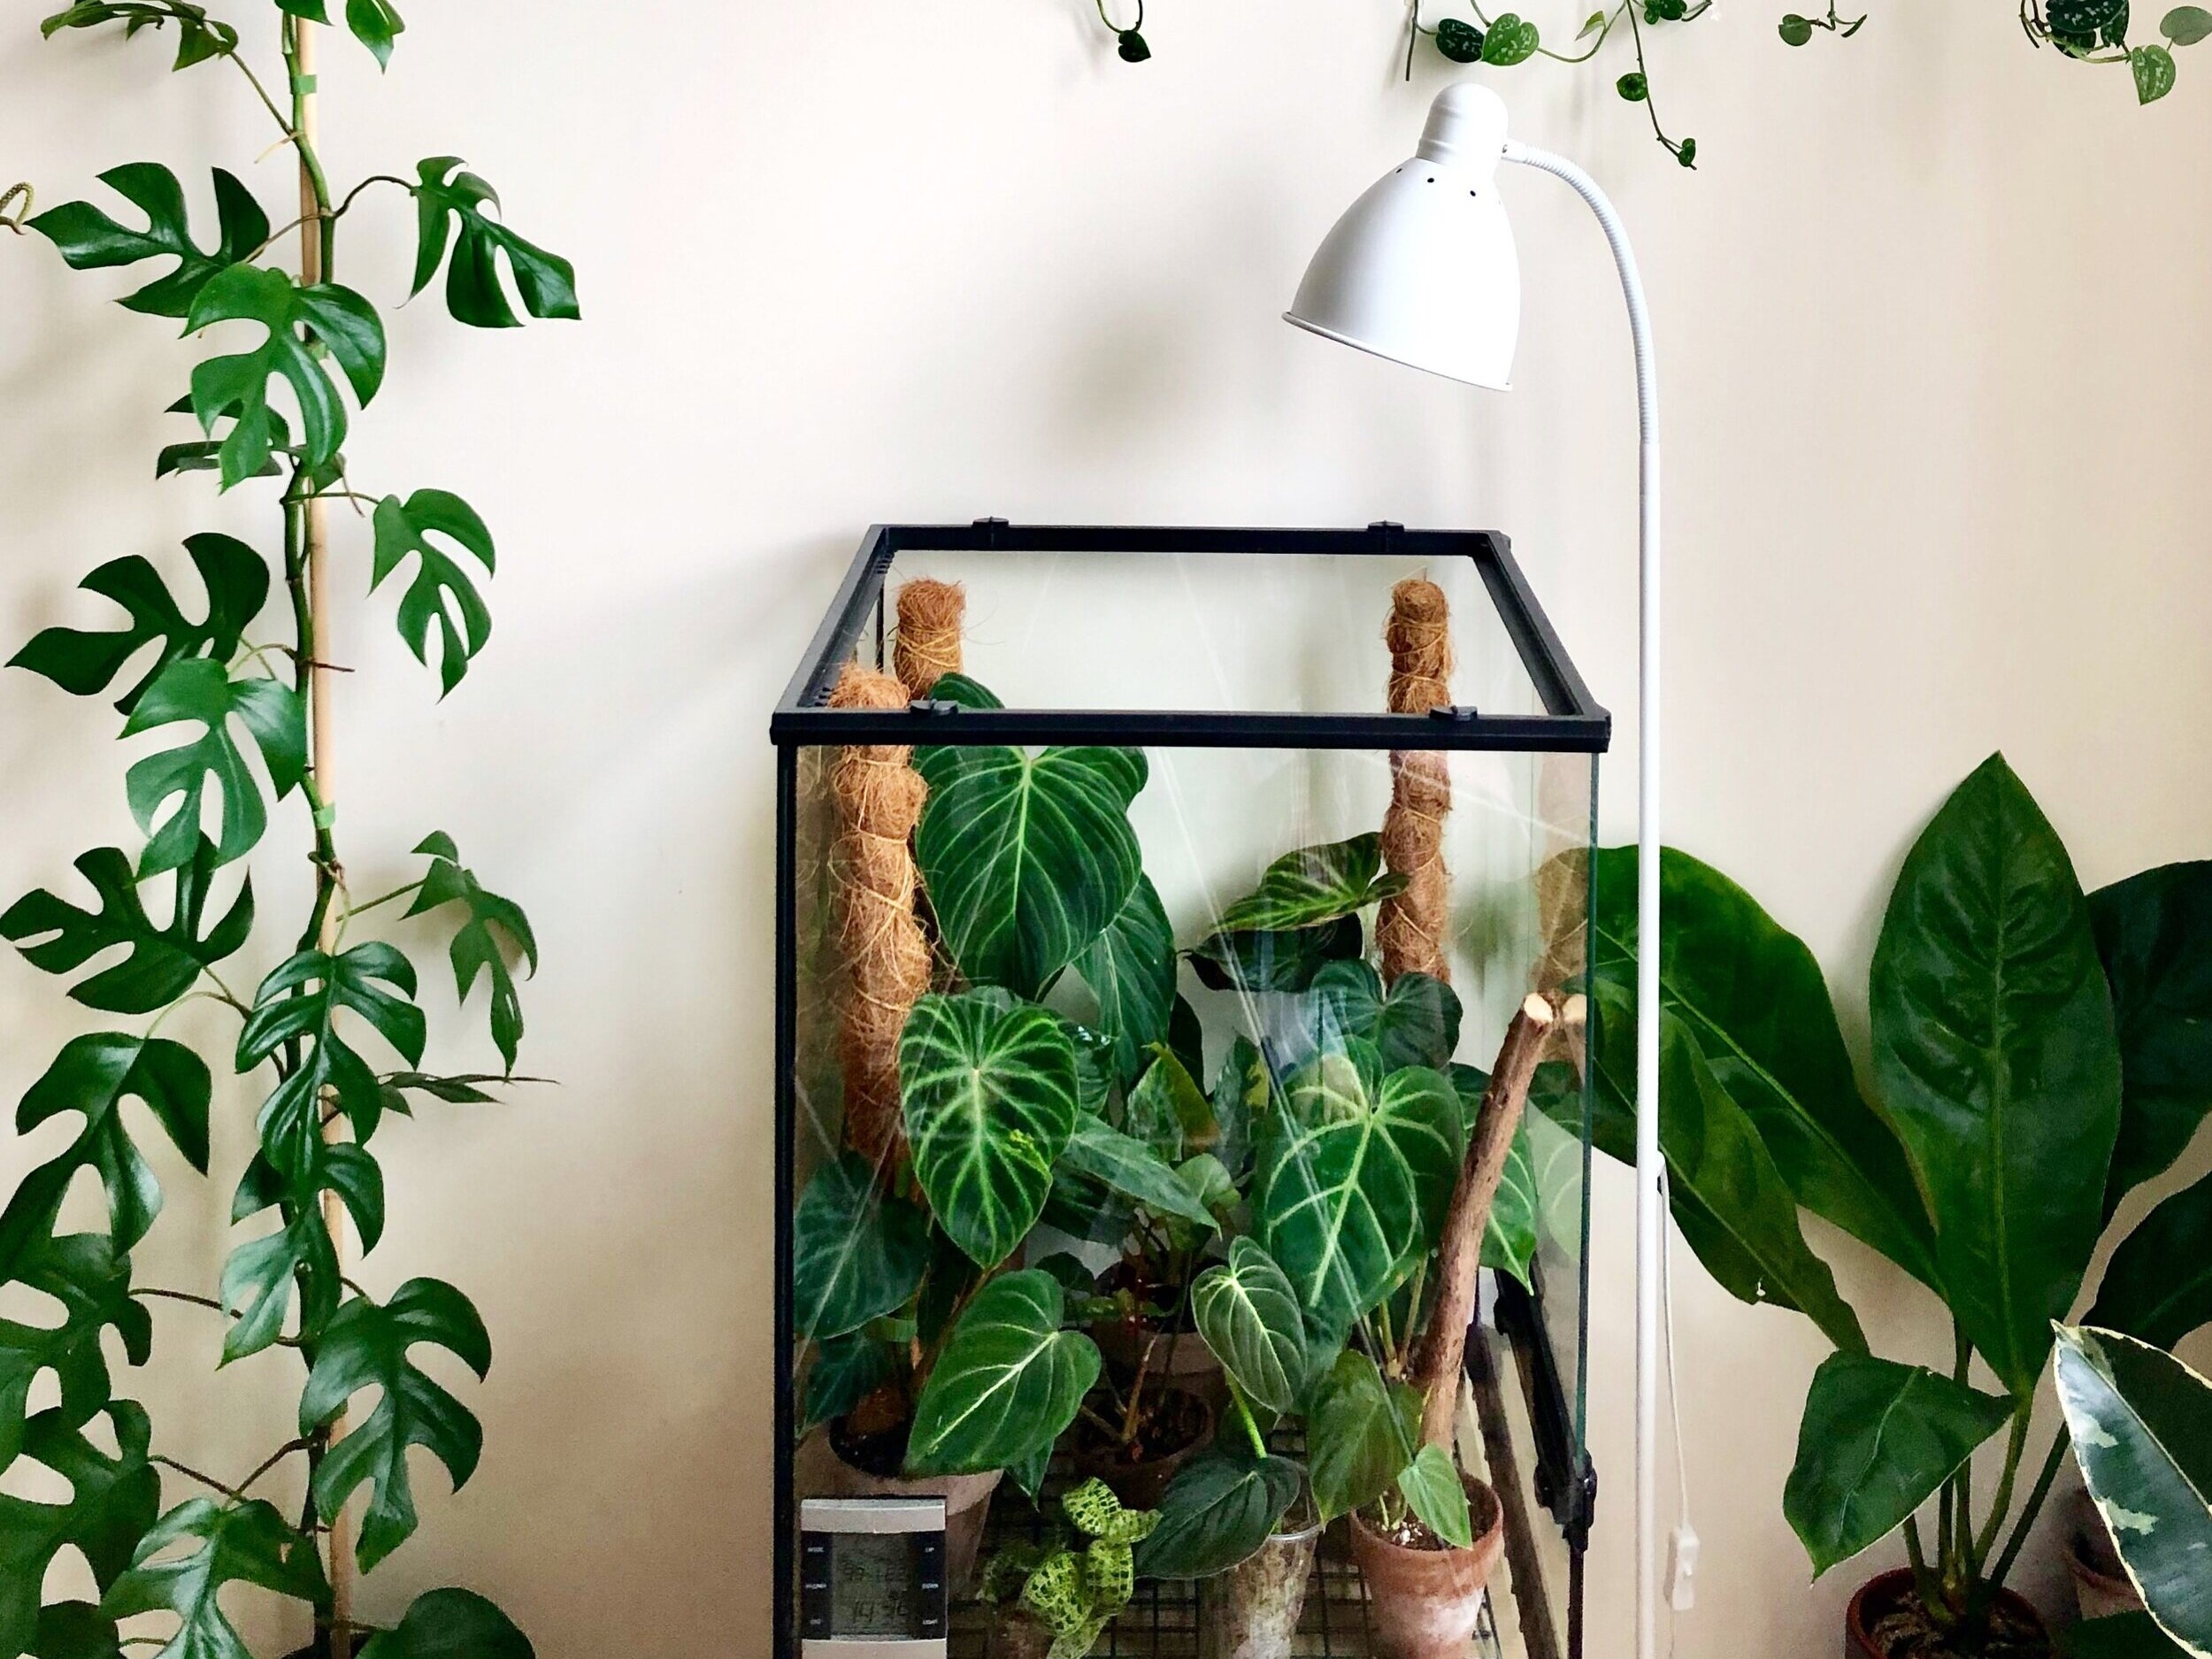 Postnummer anspore Optimal Grow lights as recommended by house plant enthusiasts — Green Rooms Market